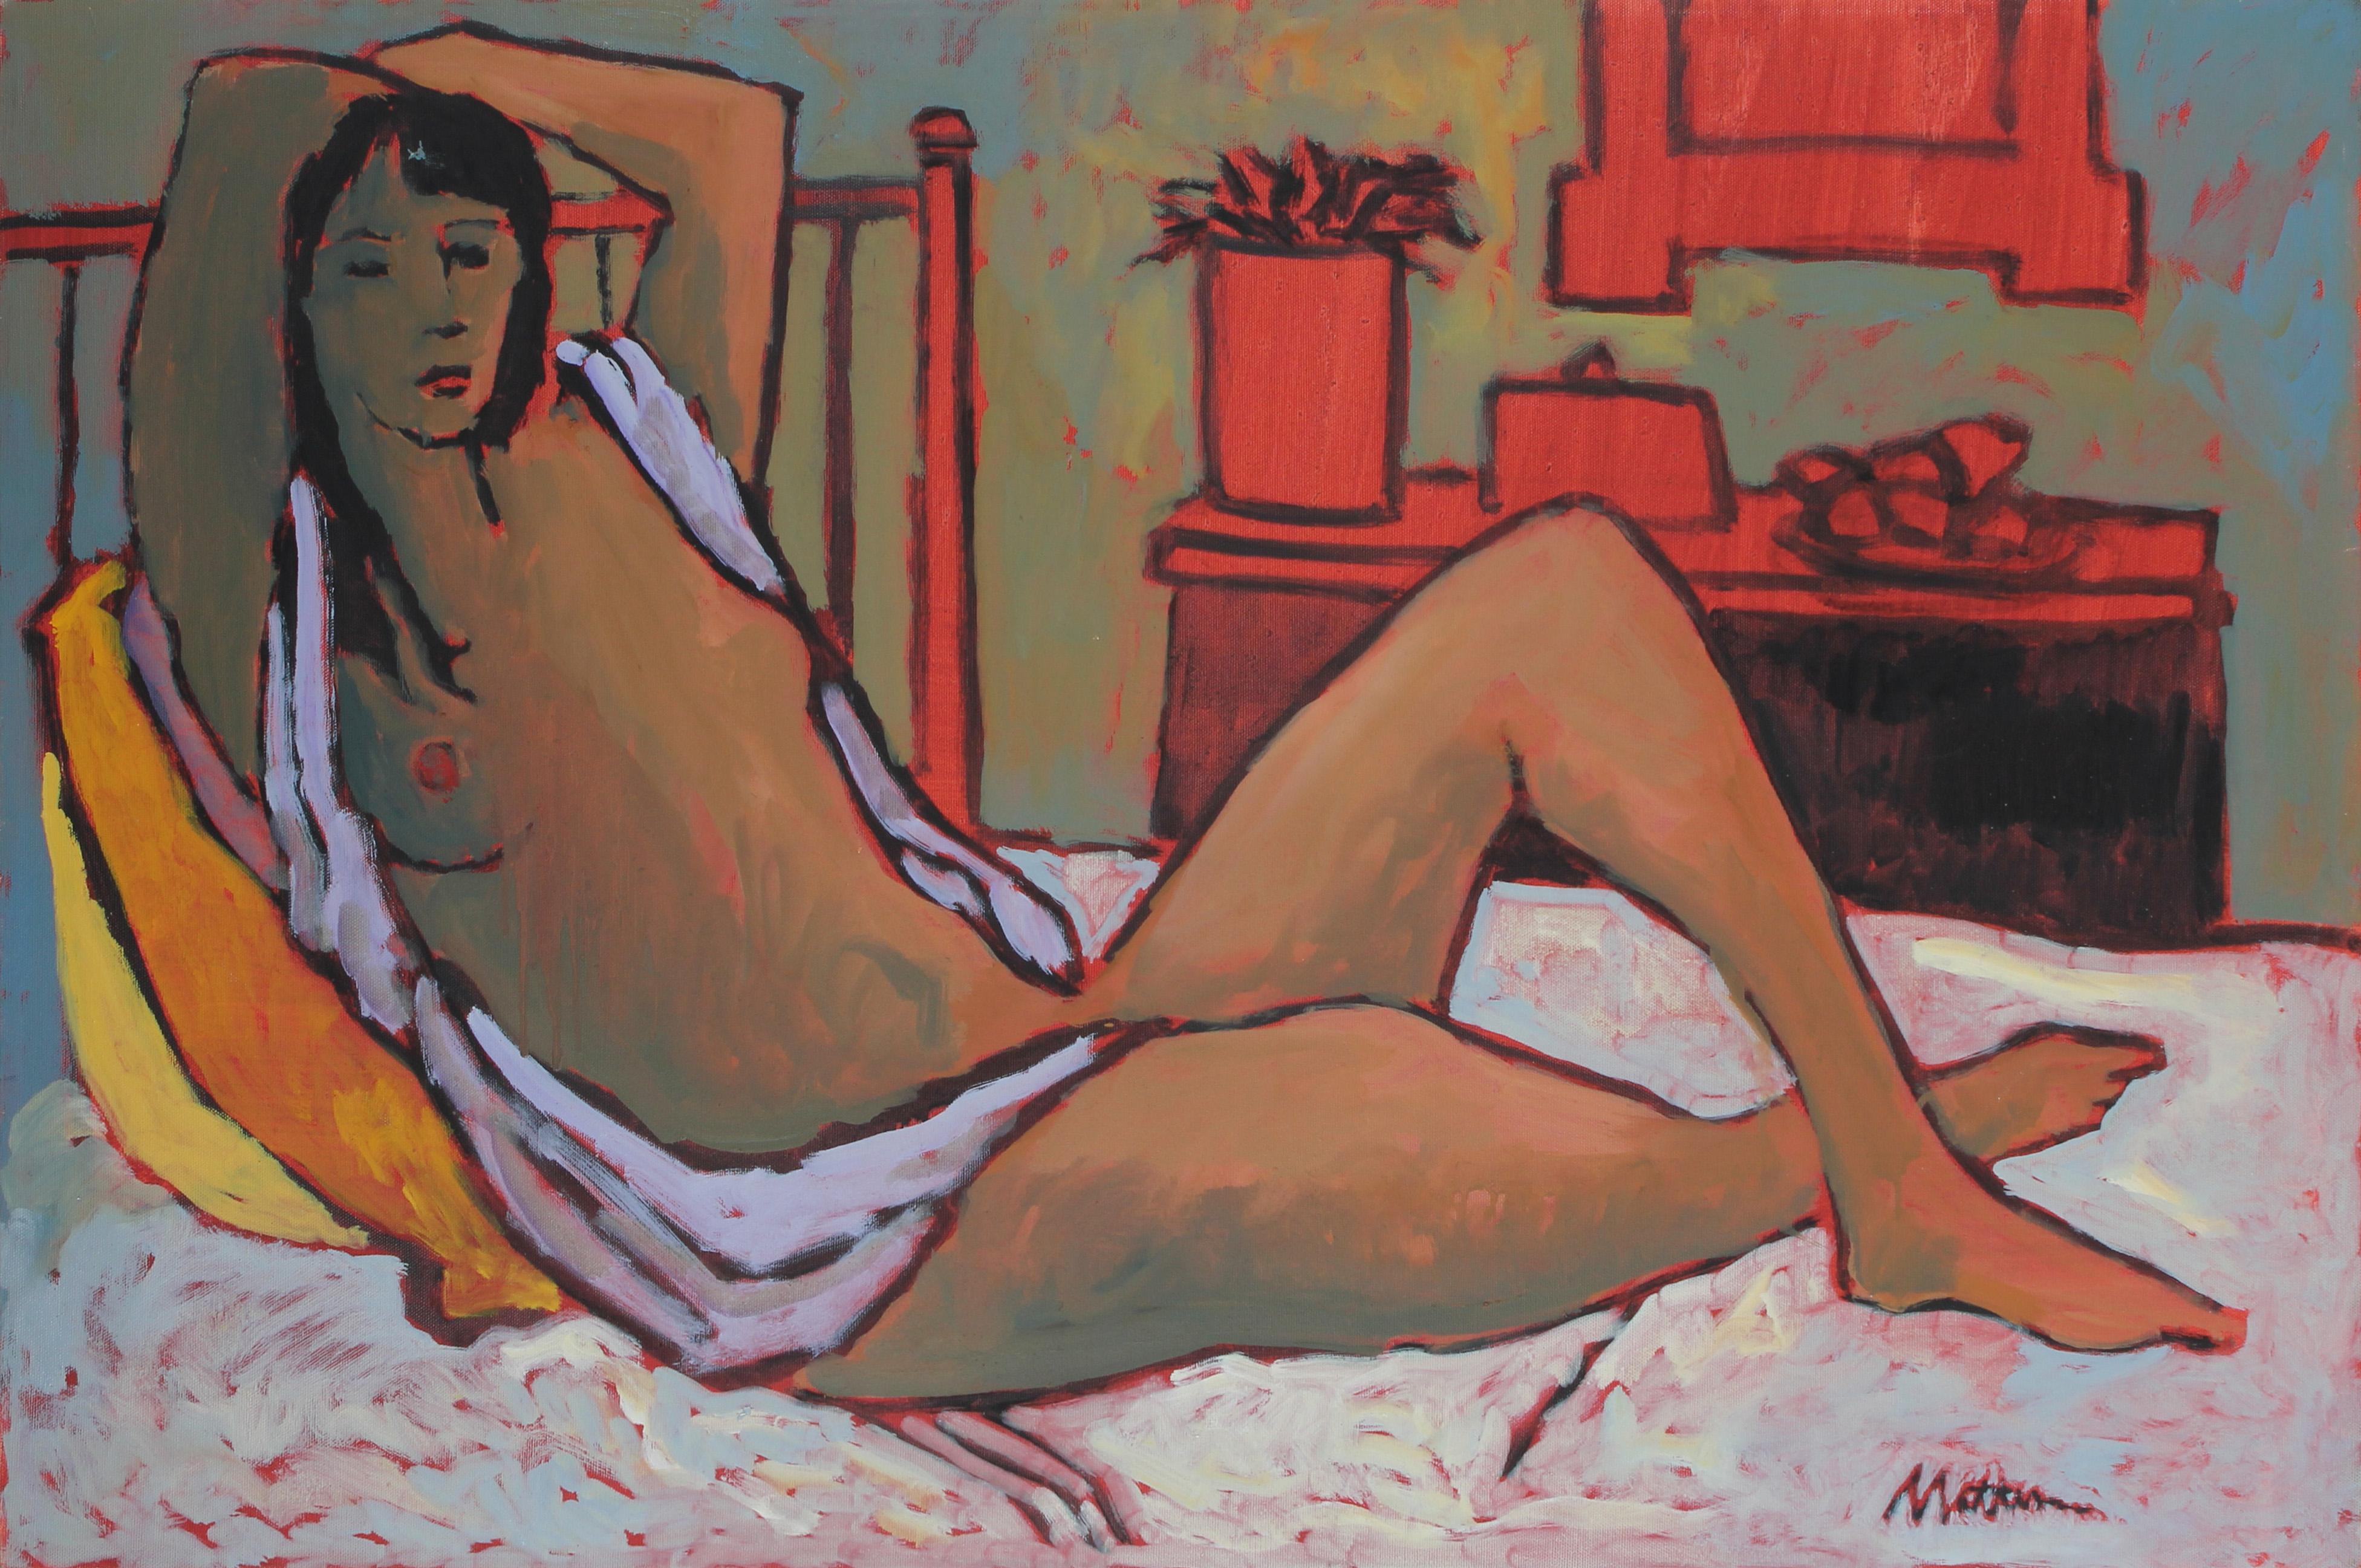 Rip Matteson Nude Painting - Female Figure in Bed, Oil on Canvas Painting, Late 20th Century